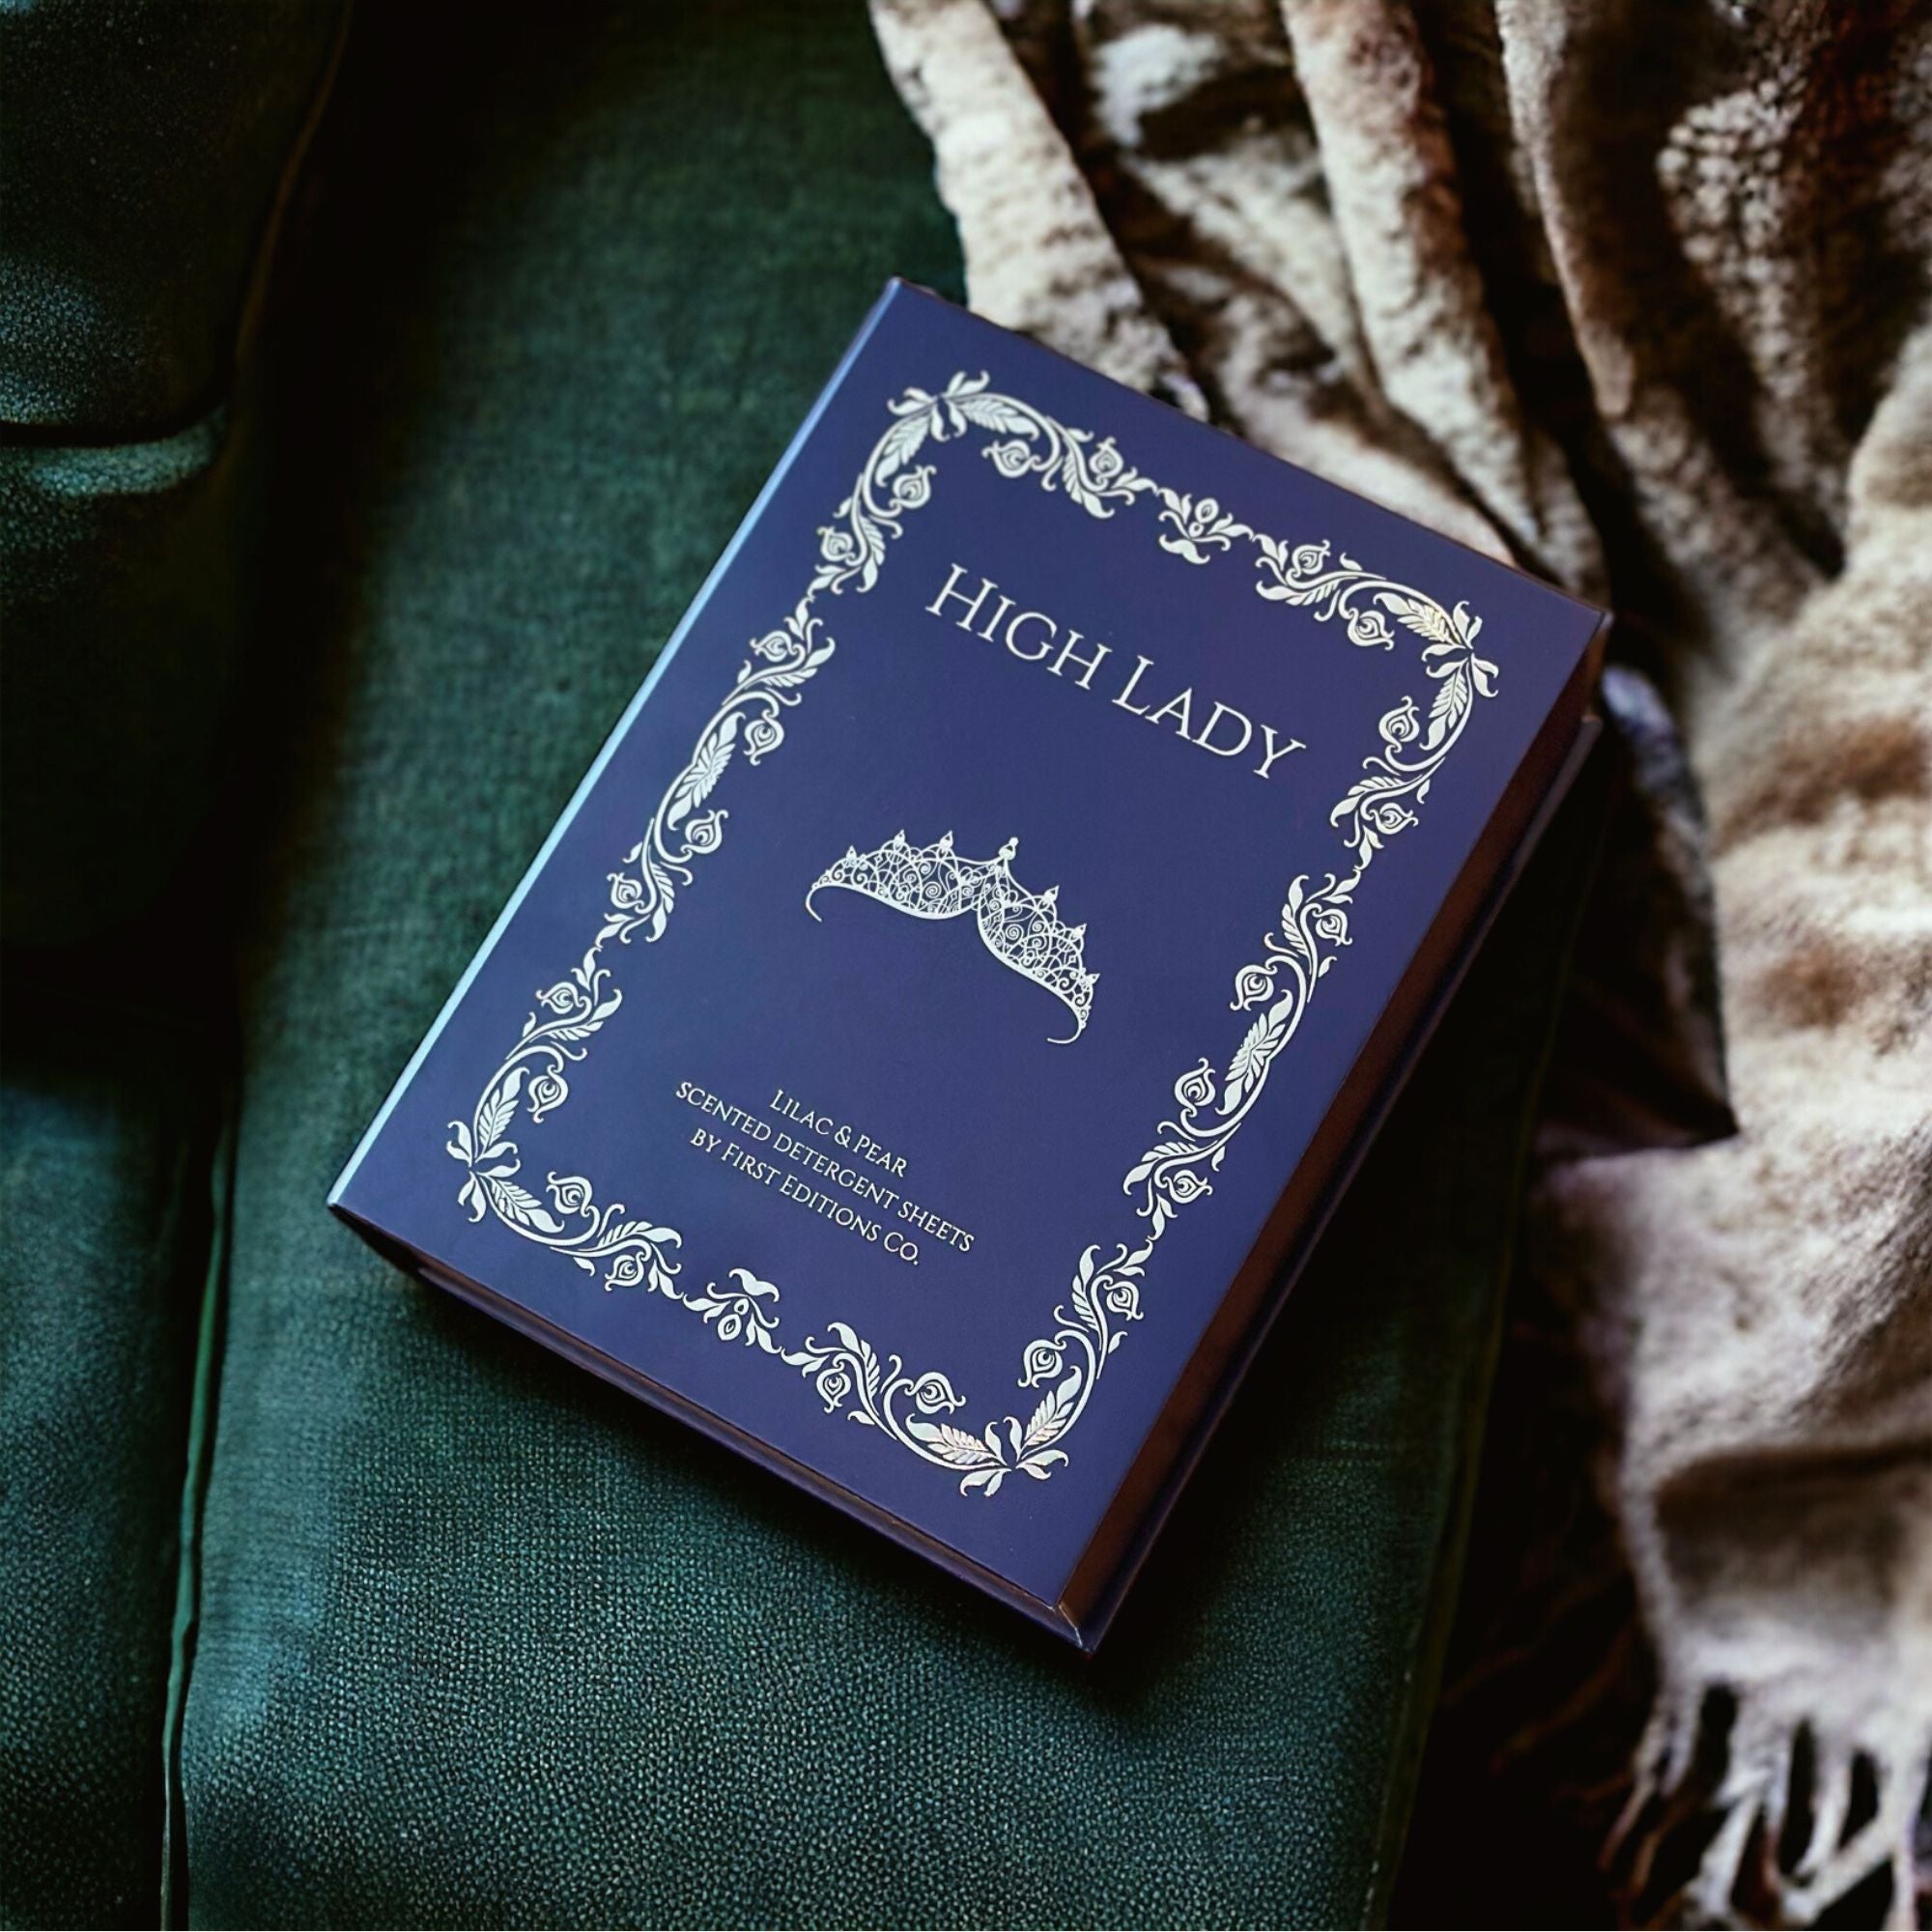 Navy blue book titled 'HIGH LADY' on a green cushion with a blanket.